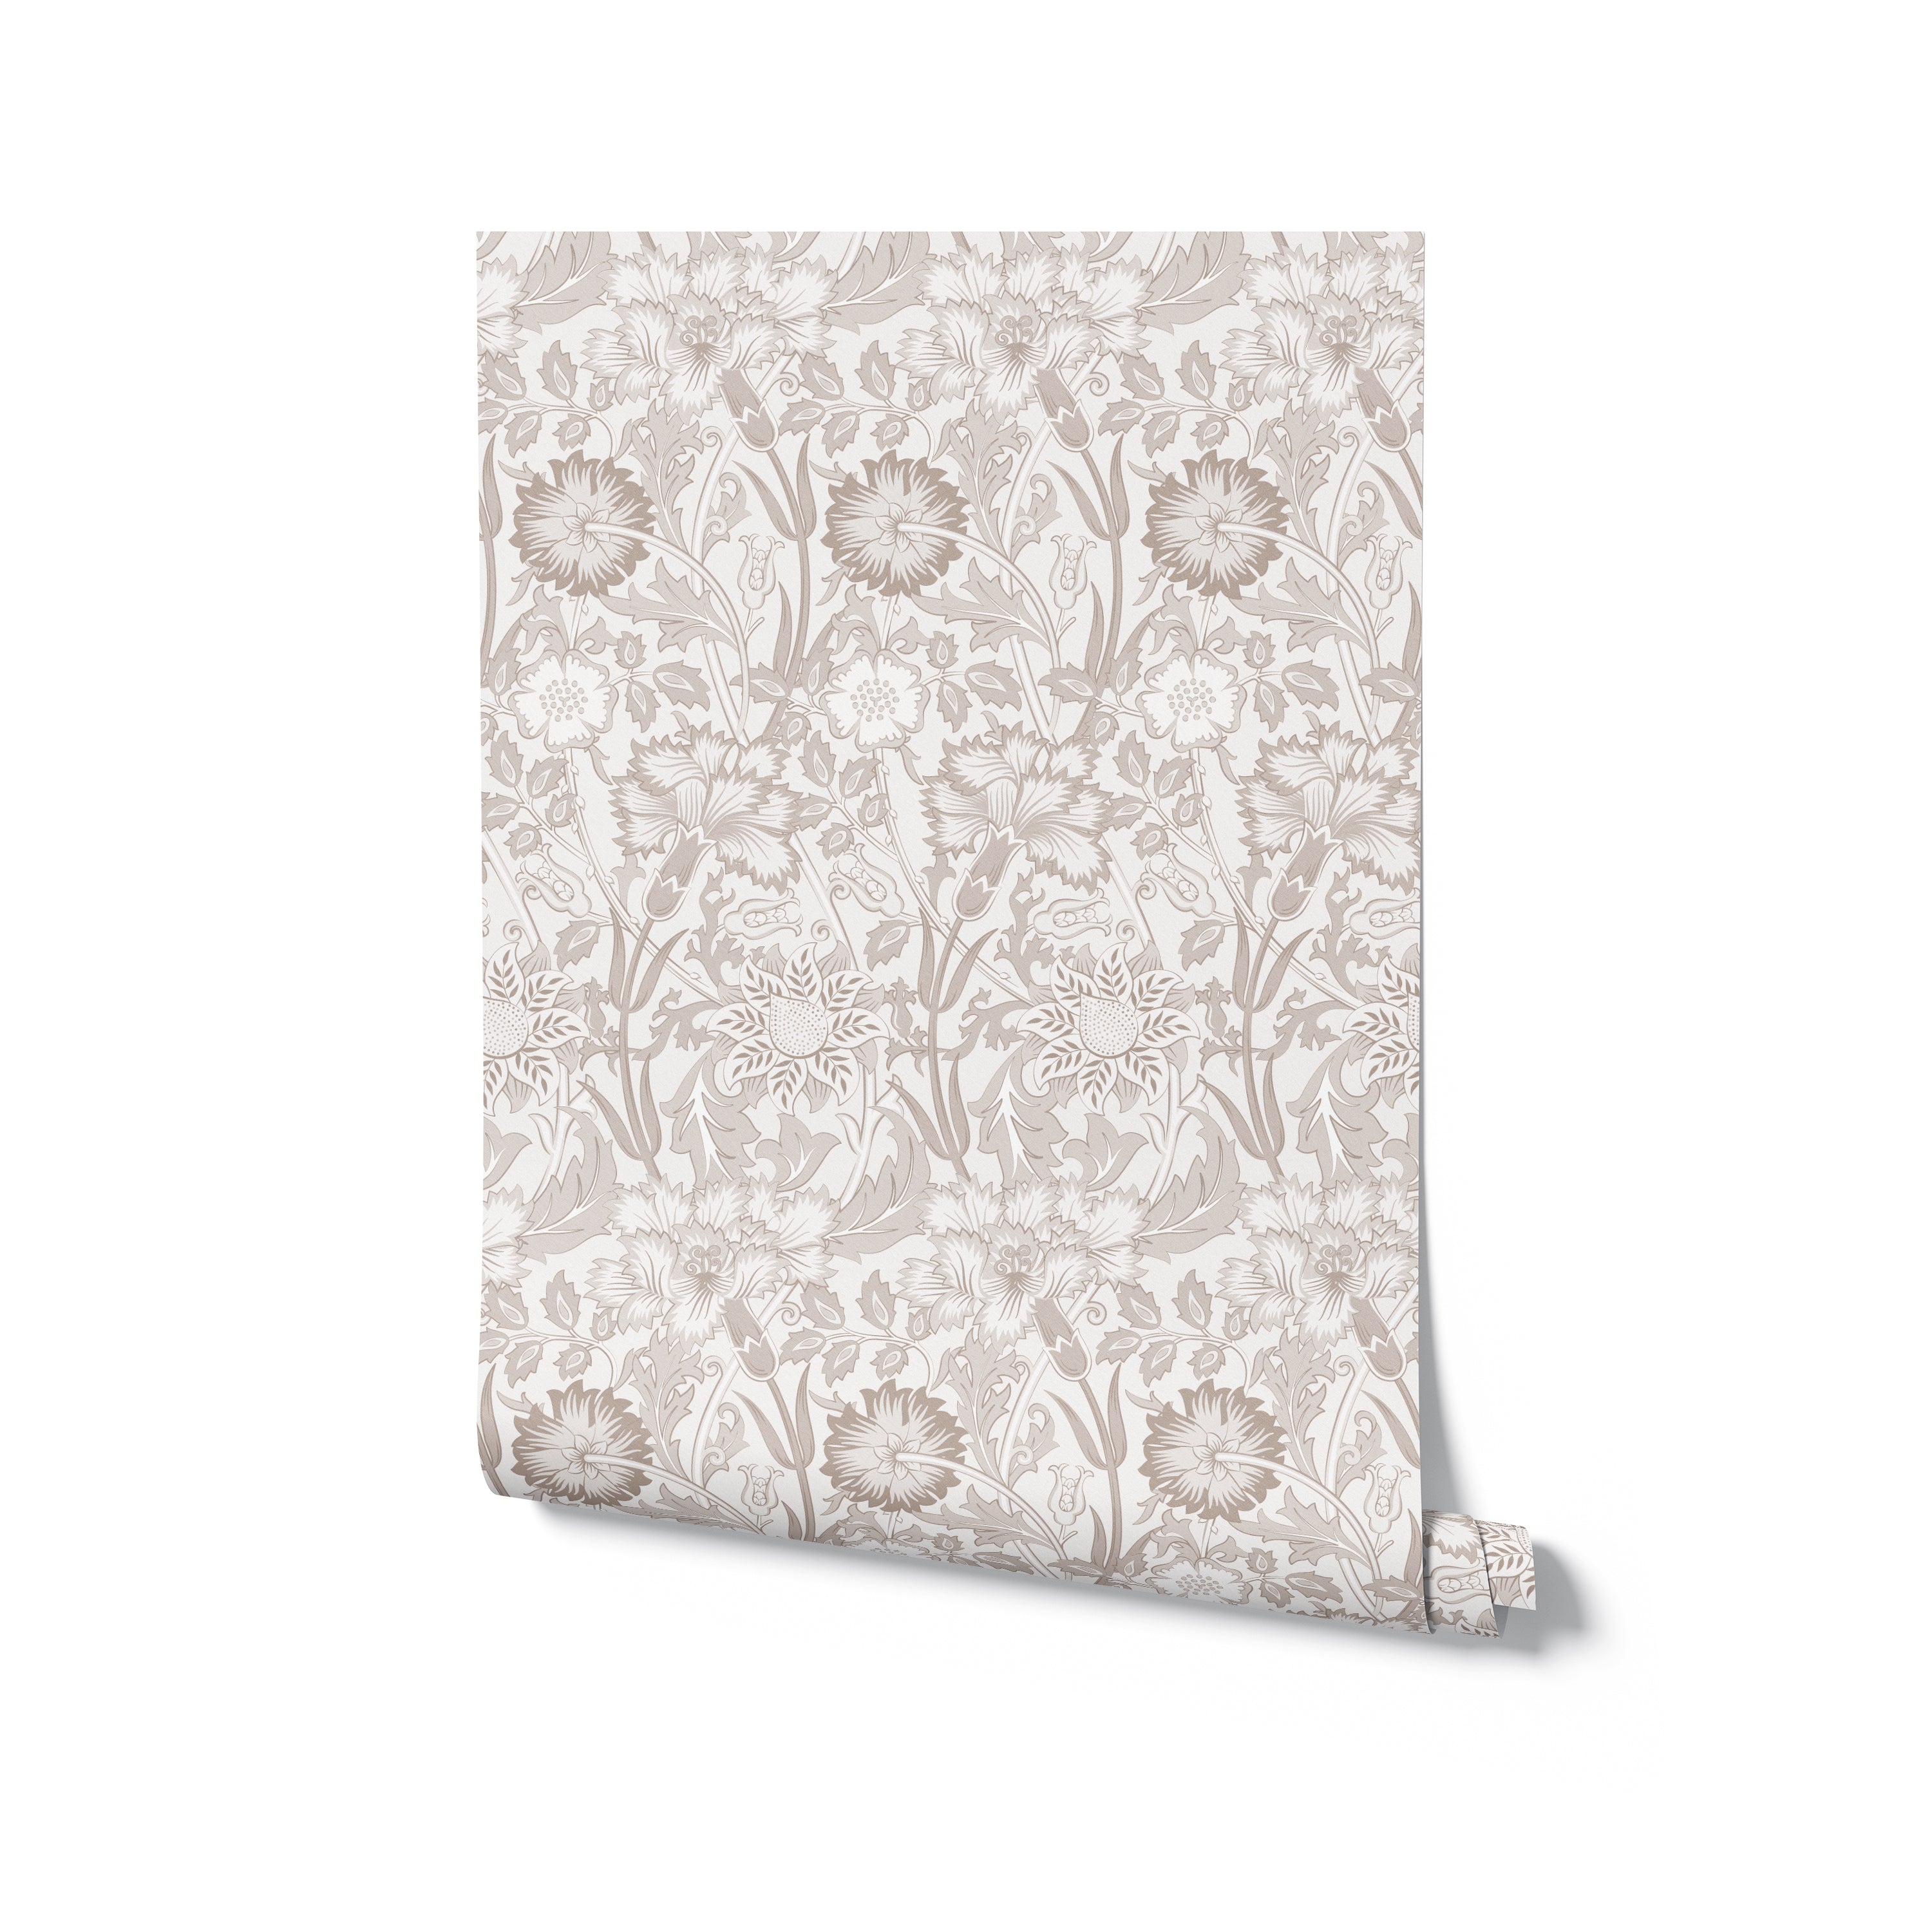 A roll of Garden Delight wallpaper, displaying its detailed beige floral pattern. The intricate design features large flowers and leaves, perfect for adding a touch of nature-inspired elegance to any interior space